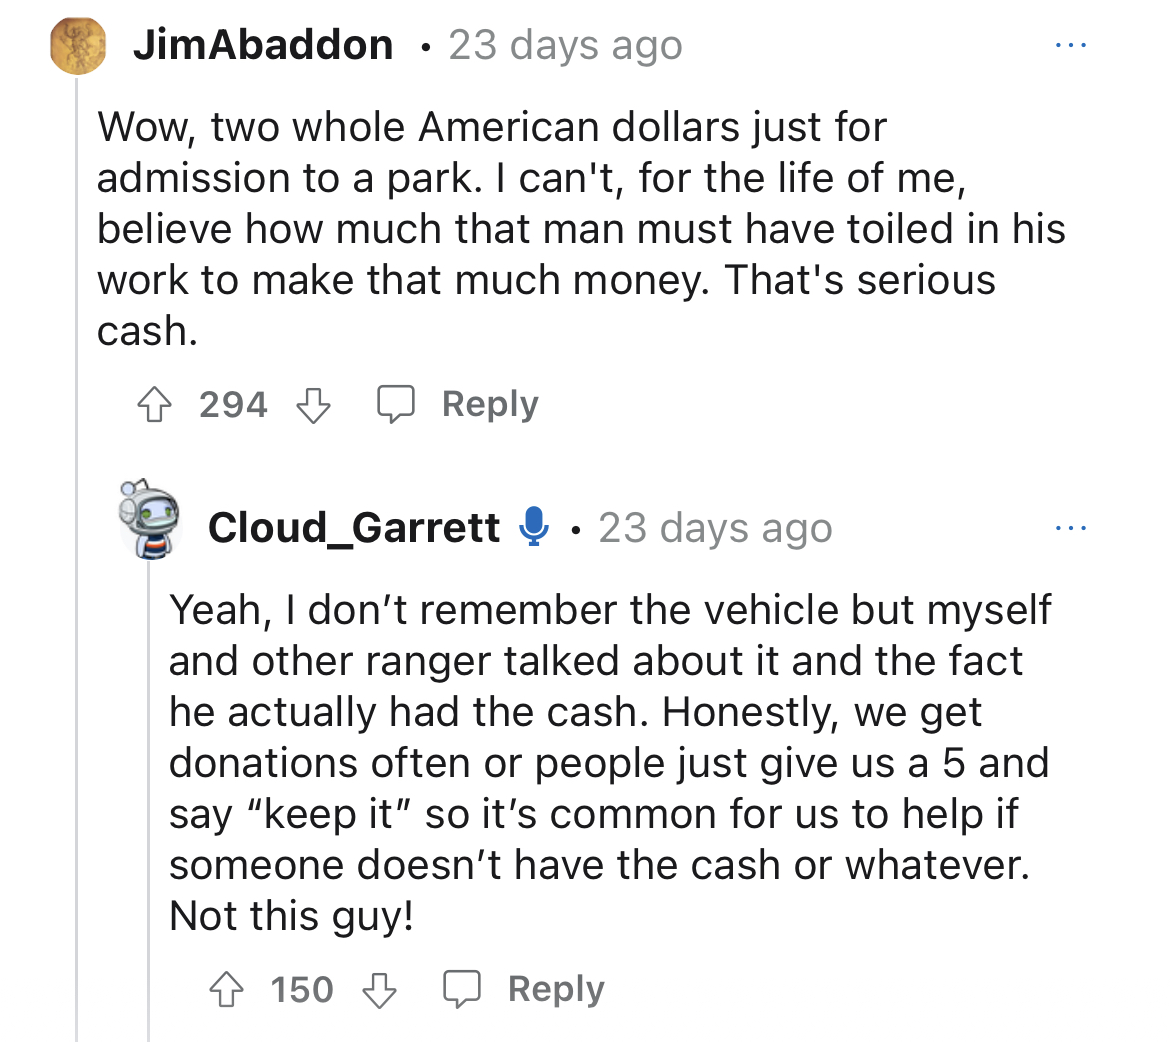 entitled dad won't pay park fee of $2 - document - JimAbaddon. 23 days ago Wow, two whole American dollars just for admission to a park. I can't, for the life of me, believe how much that man must have toiled in his work to make that much money. That's se